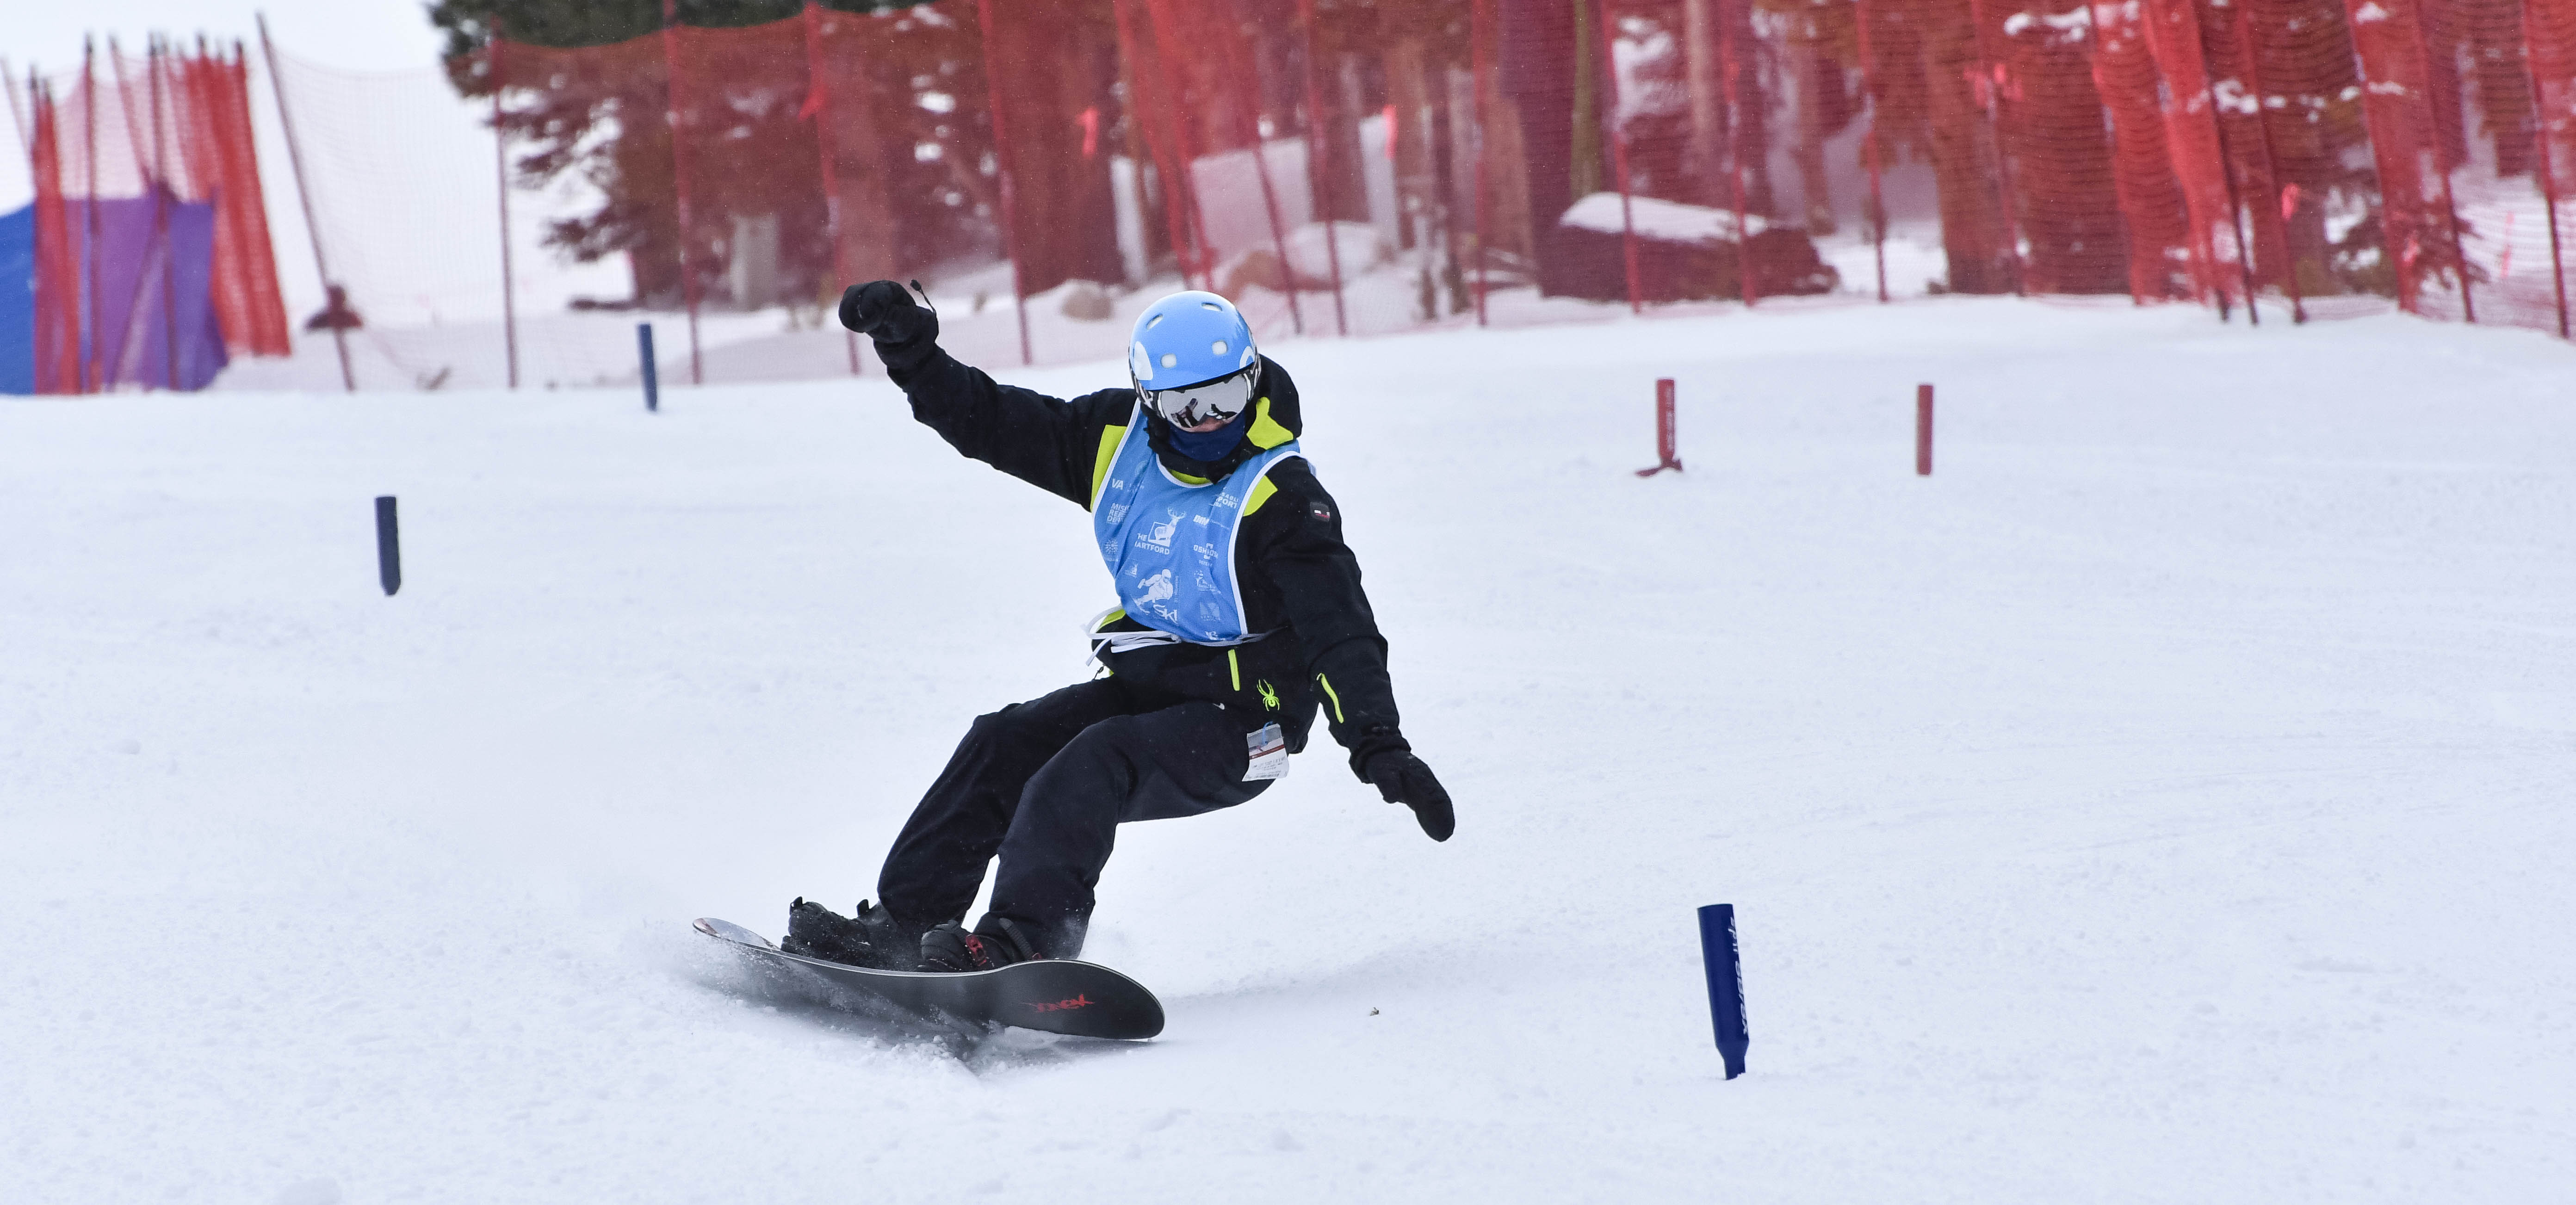 Snowboarding - Disabled Sports USA